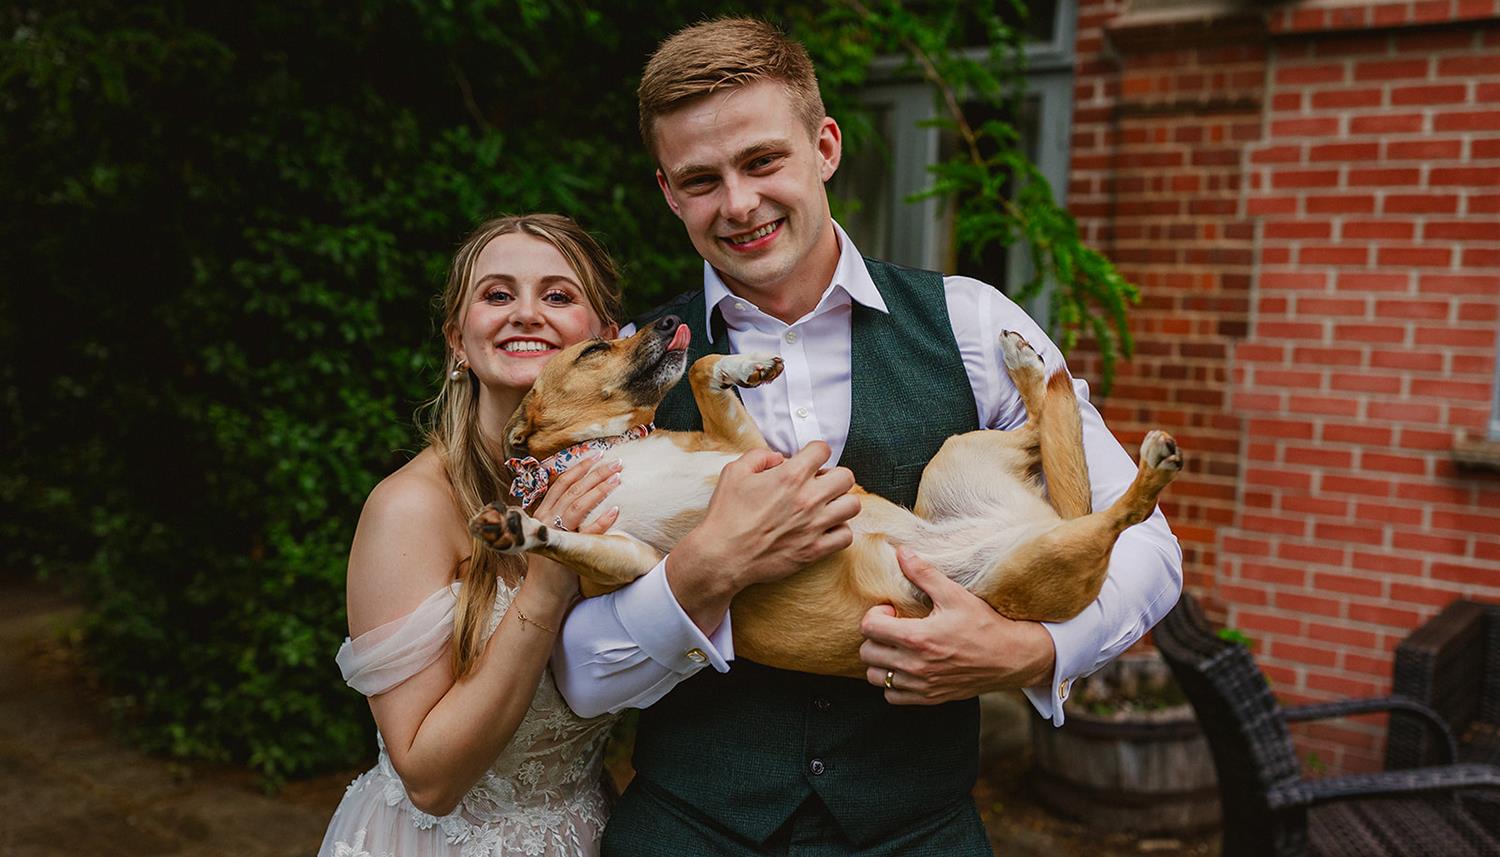 Bride, Groom and dog. Photo Credit: Philip Quinnell Photography